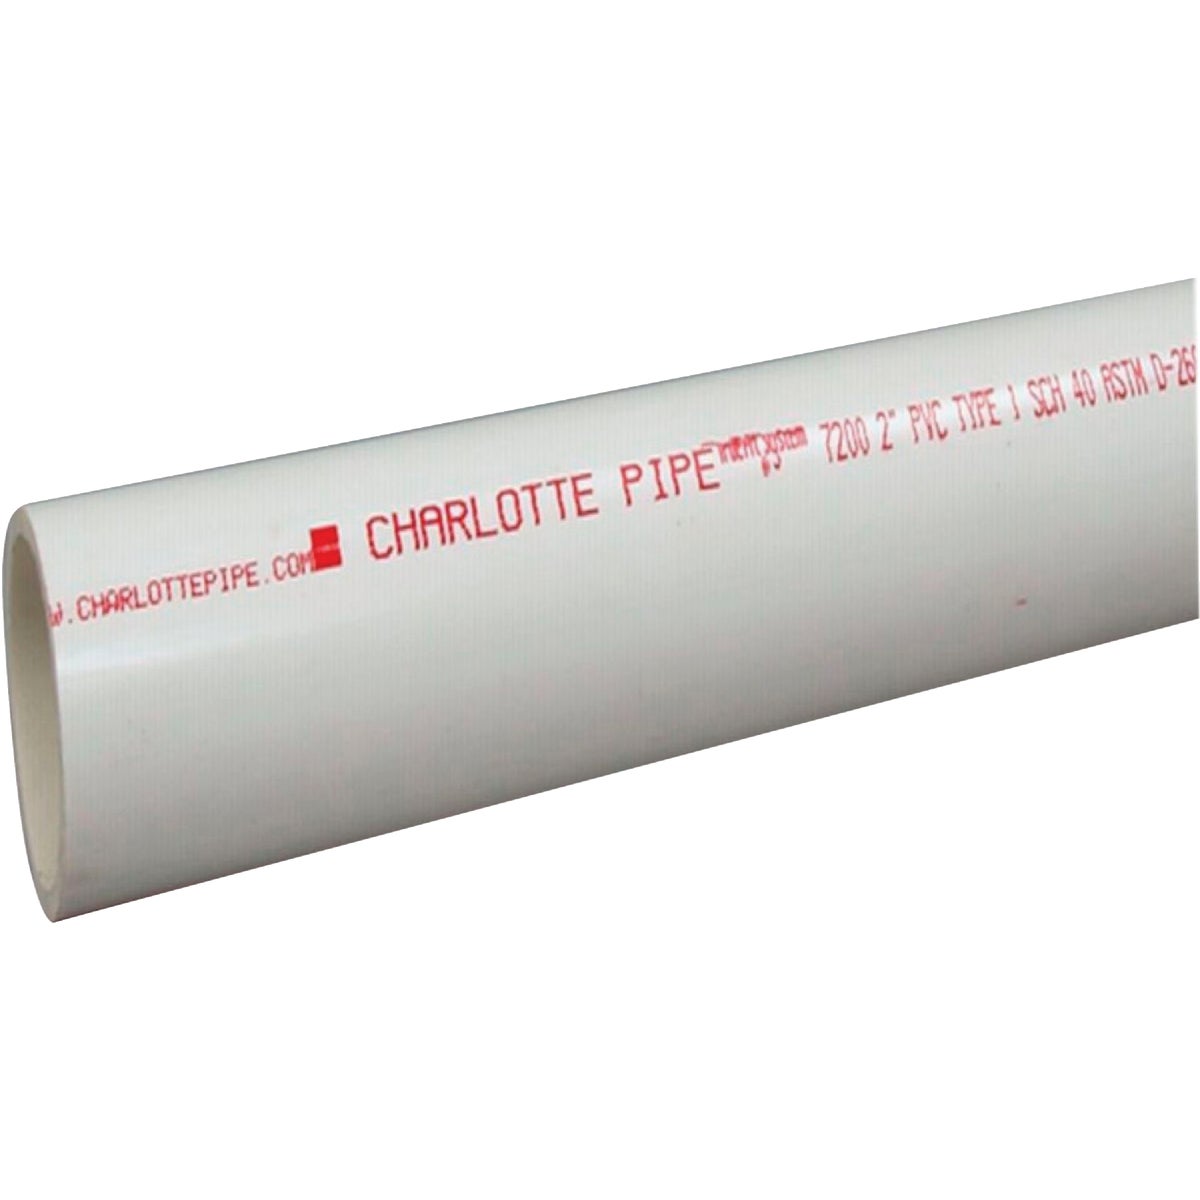 Charlotte Pipe 3 In. x 10 Ft. Schedule 40 PVC DWV/Pressure Dual Rated Pipe